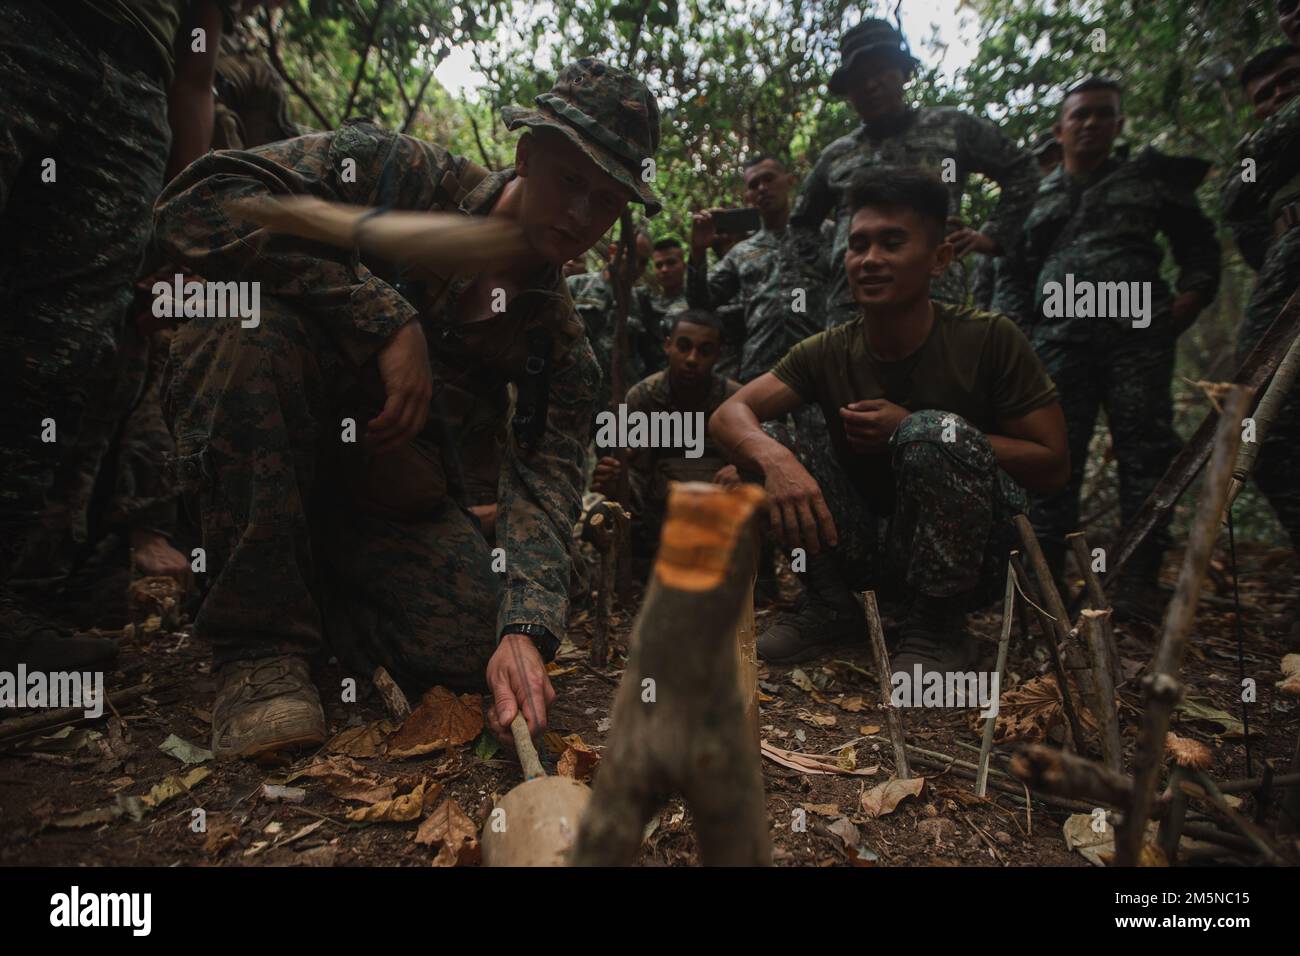 U.S. Marines with 3d Reconnaissance Battalion, 3d Marine Division, and Philippine Marines with Force Reconnaissance Group, conduct jungle survival training during Balikatan 22 at Marine Barracks Gregorio Lim, Cavite, Philippines, March 29, 2022. Balikatan is an annual exercise between the Armed Forces of the Philippines and U.S. military designed to strengthen bilateral interoperability, capabilities, trust, and cooperation built over decades of shared experiences. Balikatan, Tagalog for ‘shoulder-to-shoulder,’ is a long-standing bilateral exercise between the Philippines and the United States Stock Photo